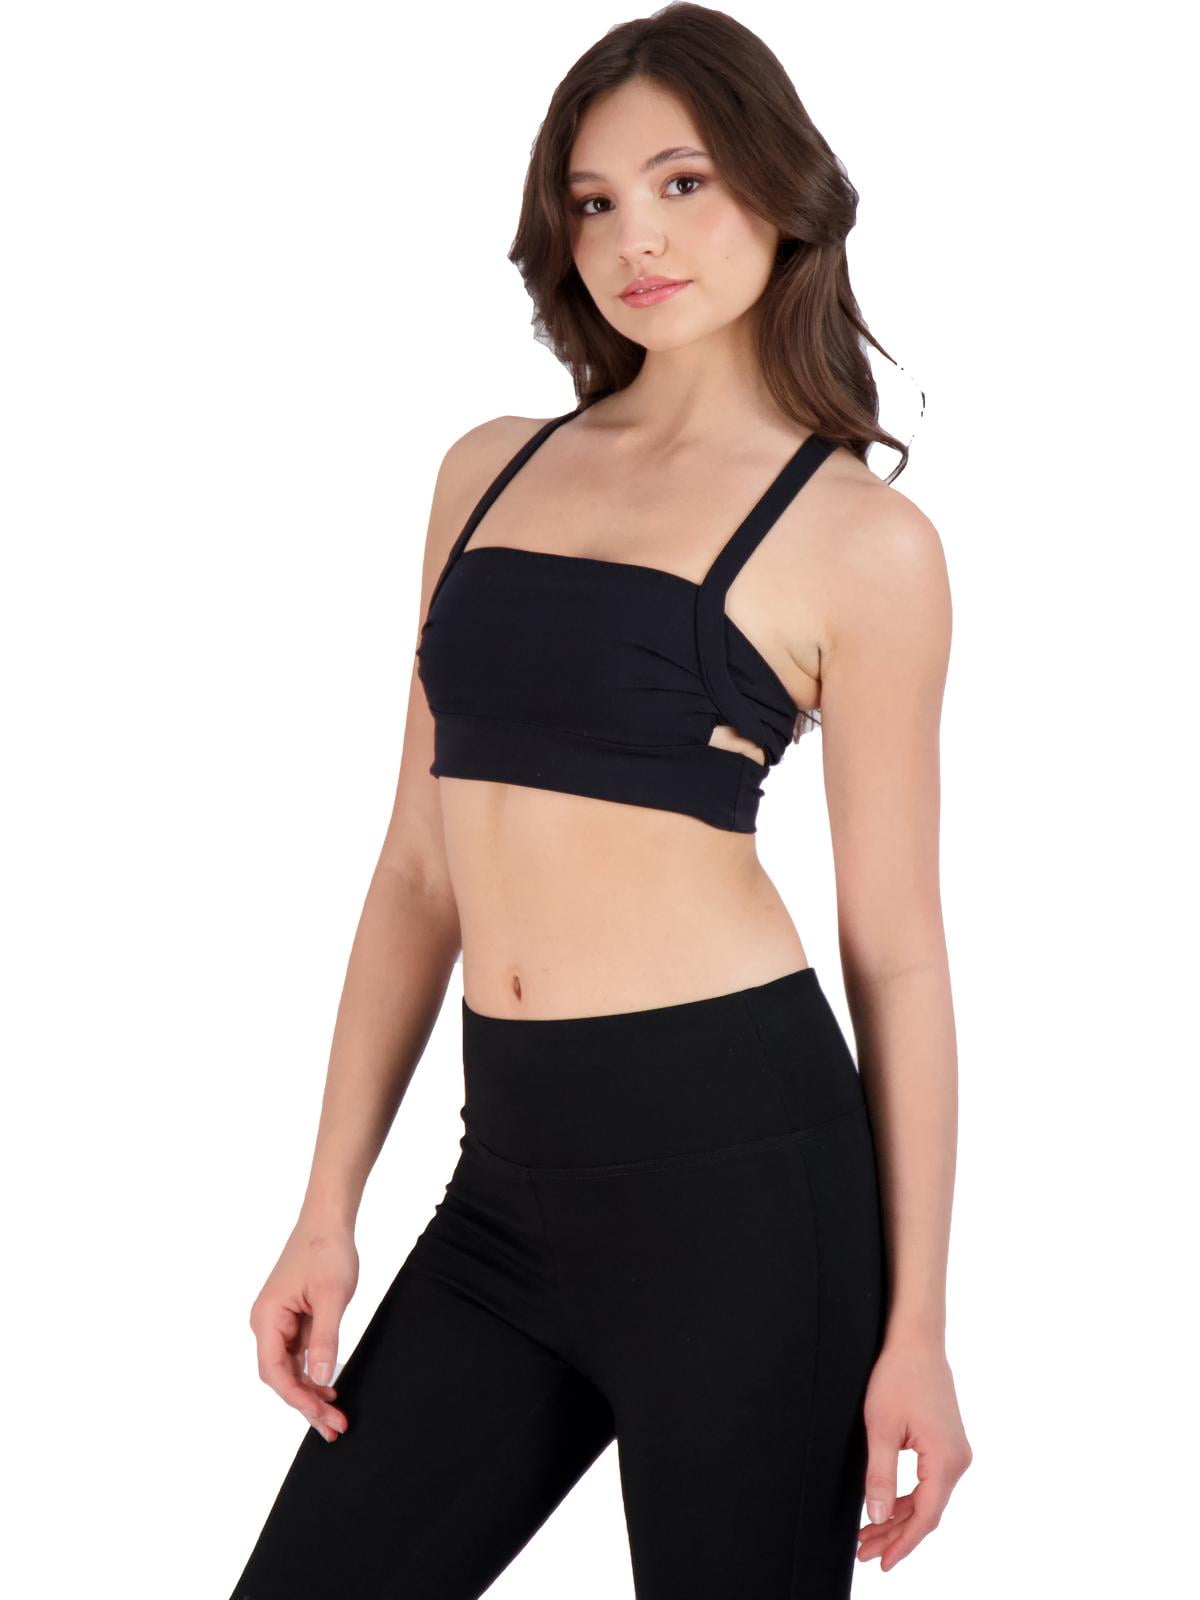 FREE PEOPLE MOVEMENT FREE THROW SQUARE NECK BRA - BLACK 1567 – Work It Out